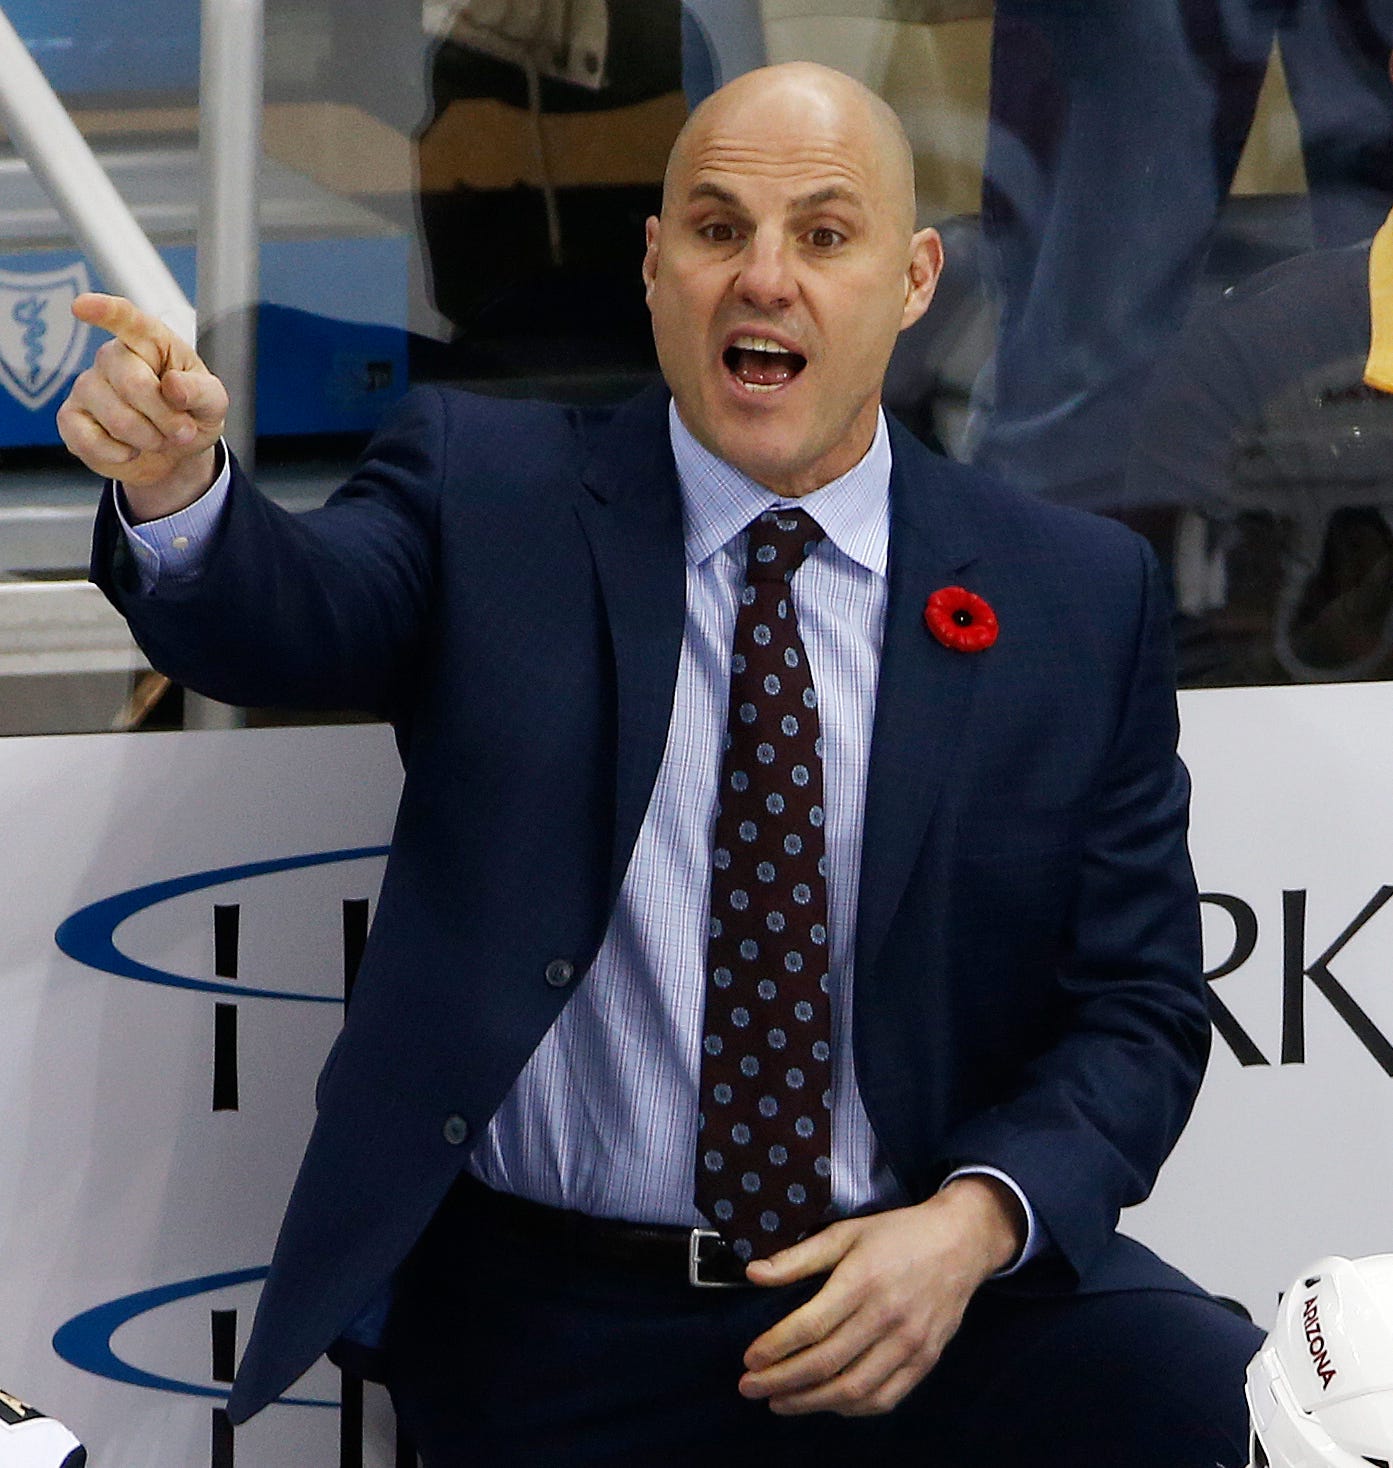 Coyotes coach Tocchet on leave, dealing with family illness